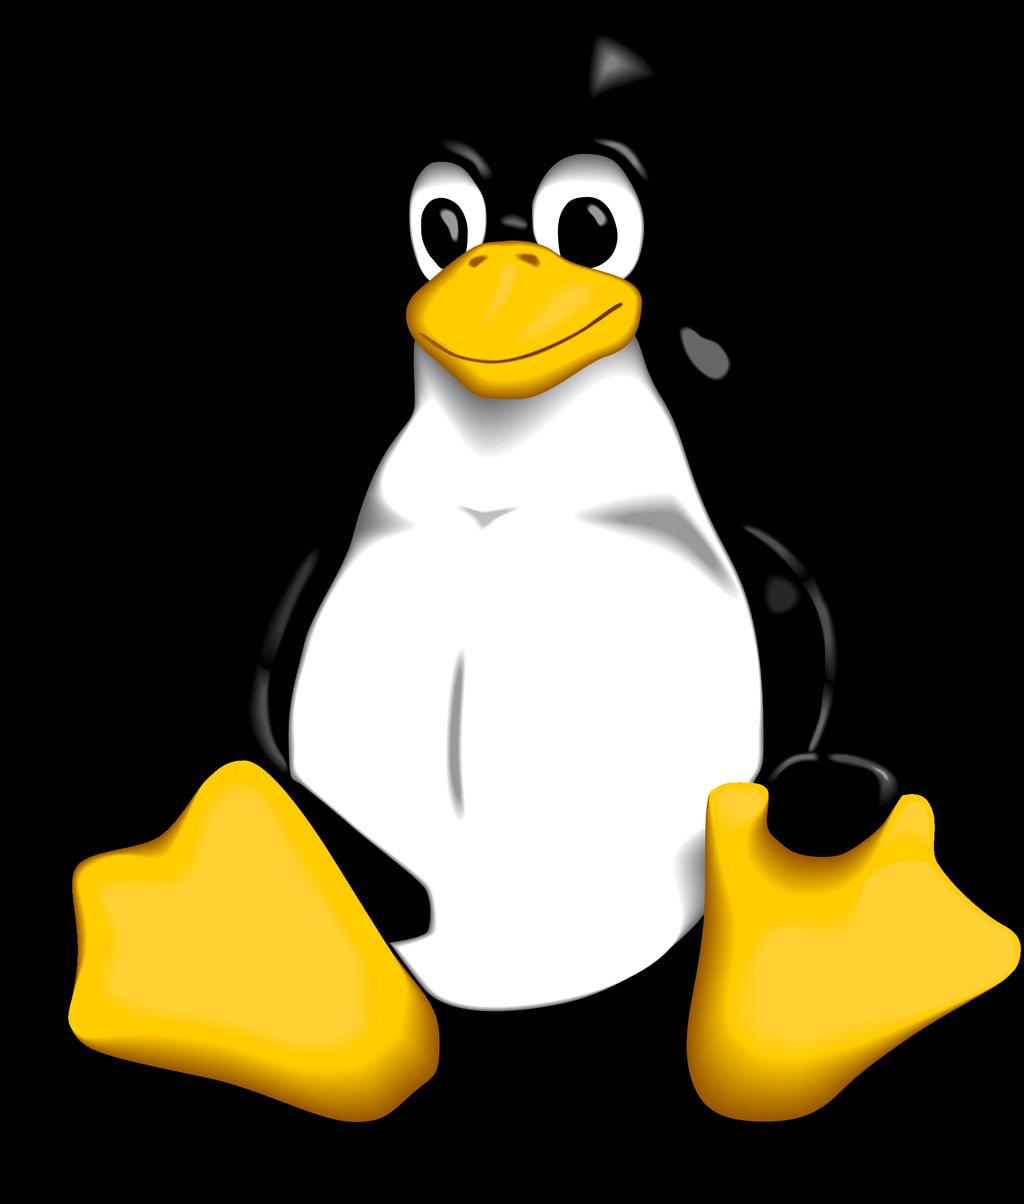 Upstream Kernel (ORNL, Intel, Cray, SuSE) Kernel 4.14 updated to approximately Lustre 2.8, plus many fixes cross-ported Lustre 2.12 updates for kernel 4.